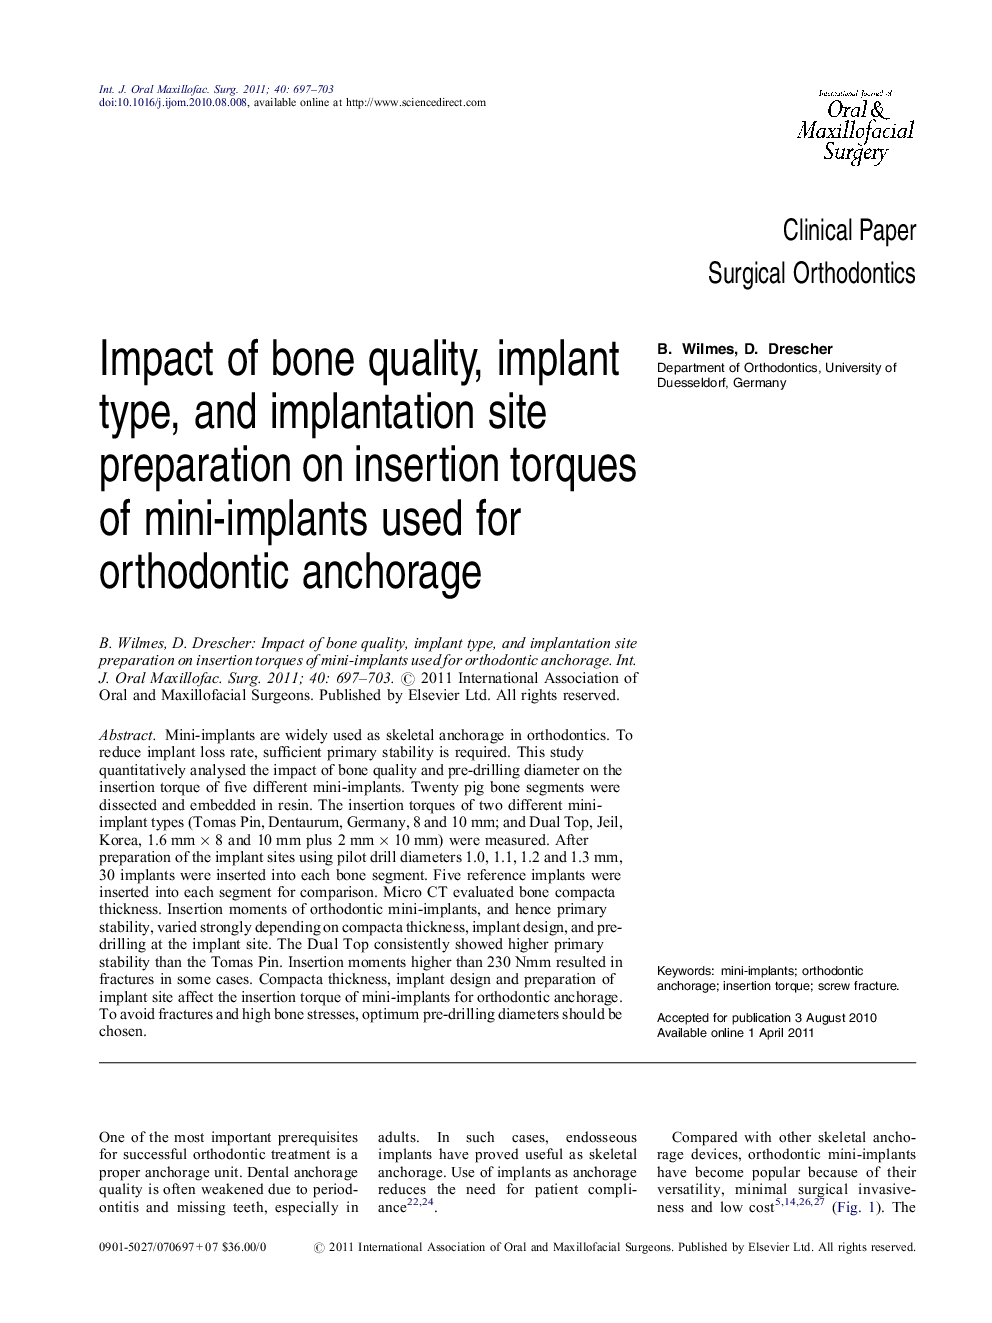 Impact of bone quality, implant type, and implantation site preparation on insertion torques of mini-implants used for orthodontic anchorage